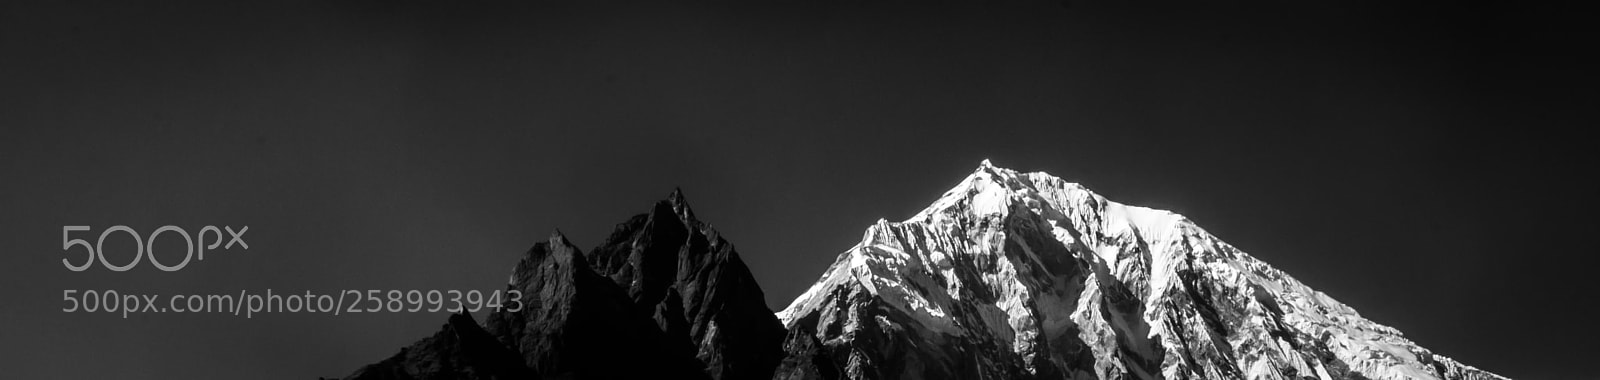 Nikon D90 sample photo. Peaks in black and photography